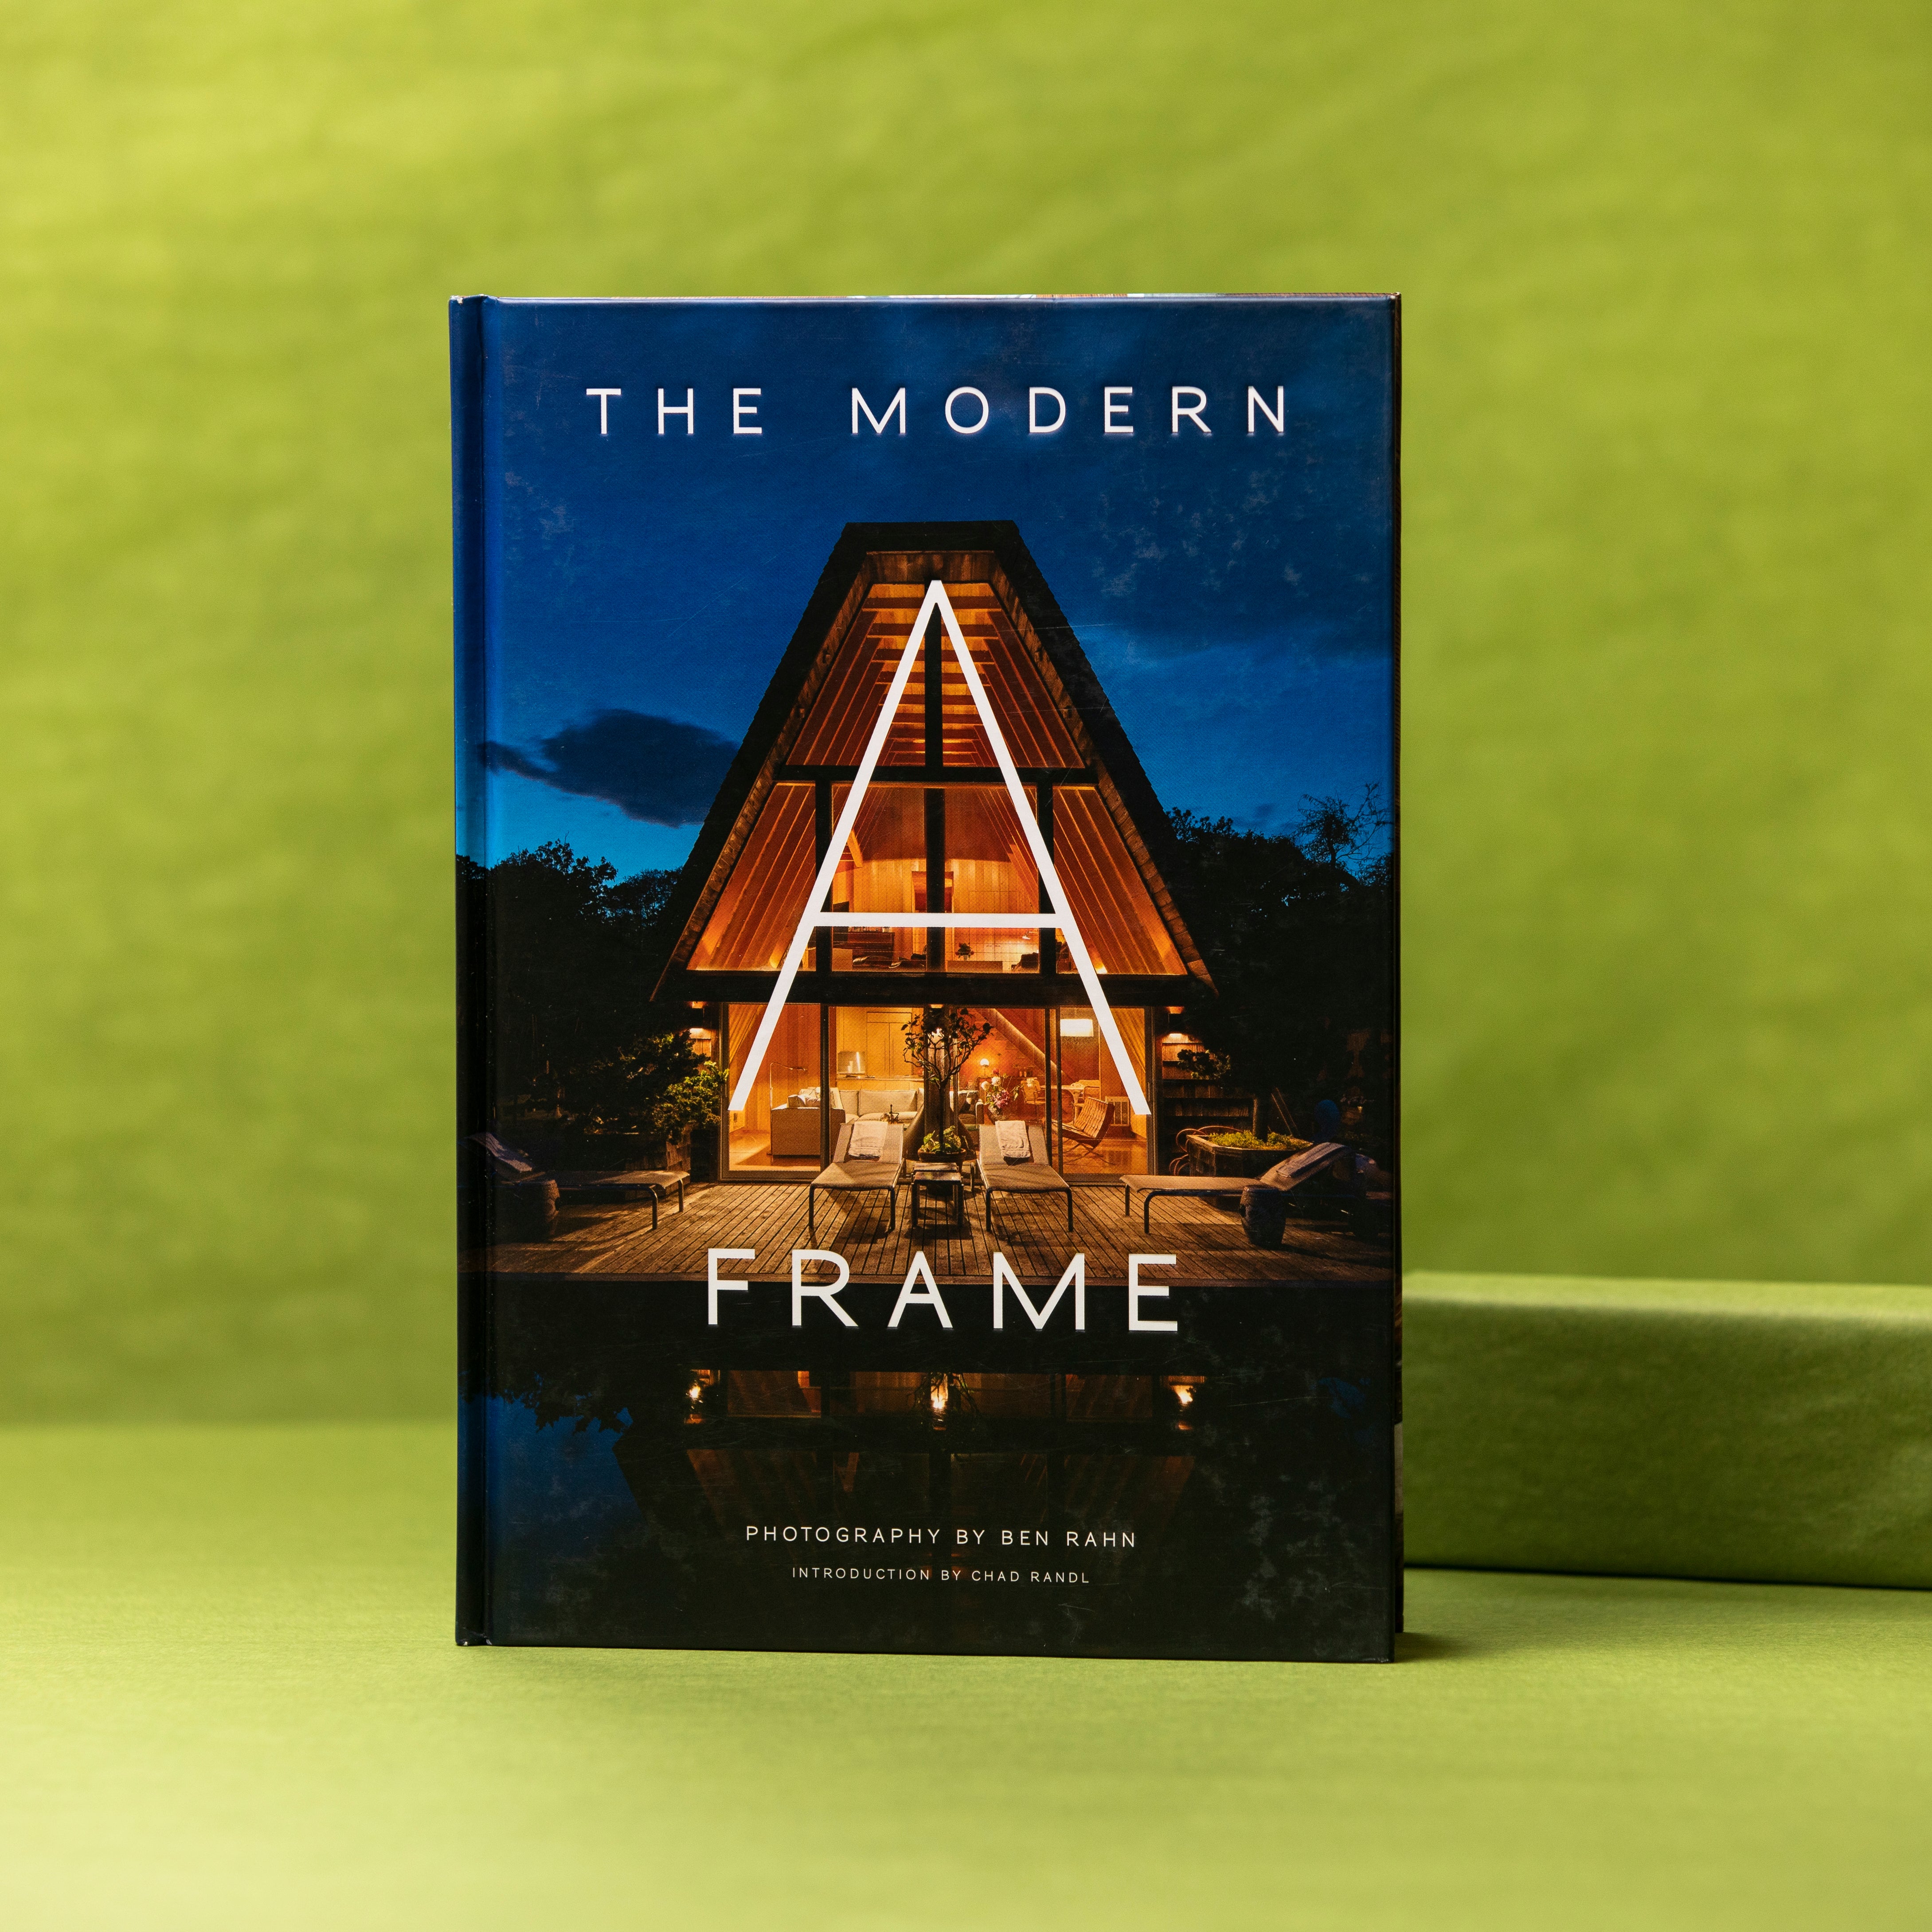 Gibbs Smith The Modern A-Frame Book - Architecture Book - Book About A-Frames -  Good Read - Book - Reading - Women's Clothing Store - Women's Accessories - Gift Store - Ladies Boutique - O KOO RAN - Big Bear Lake California